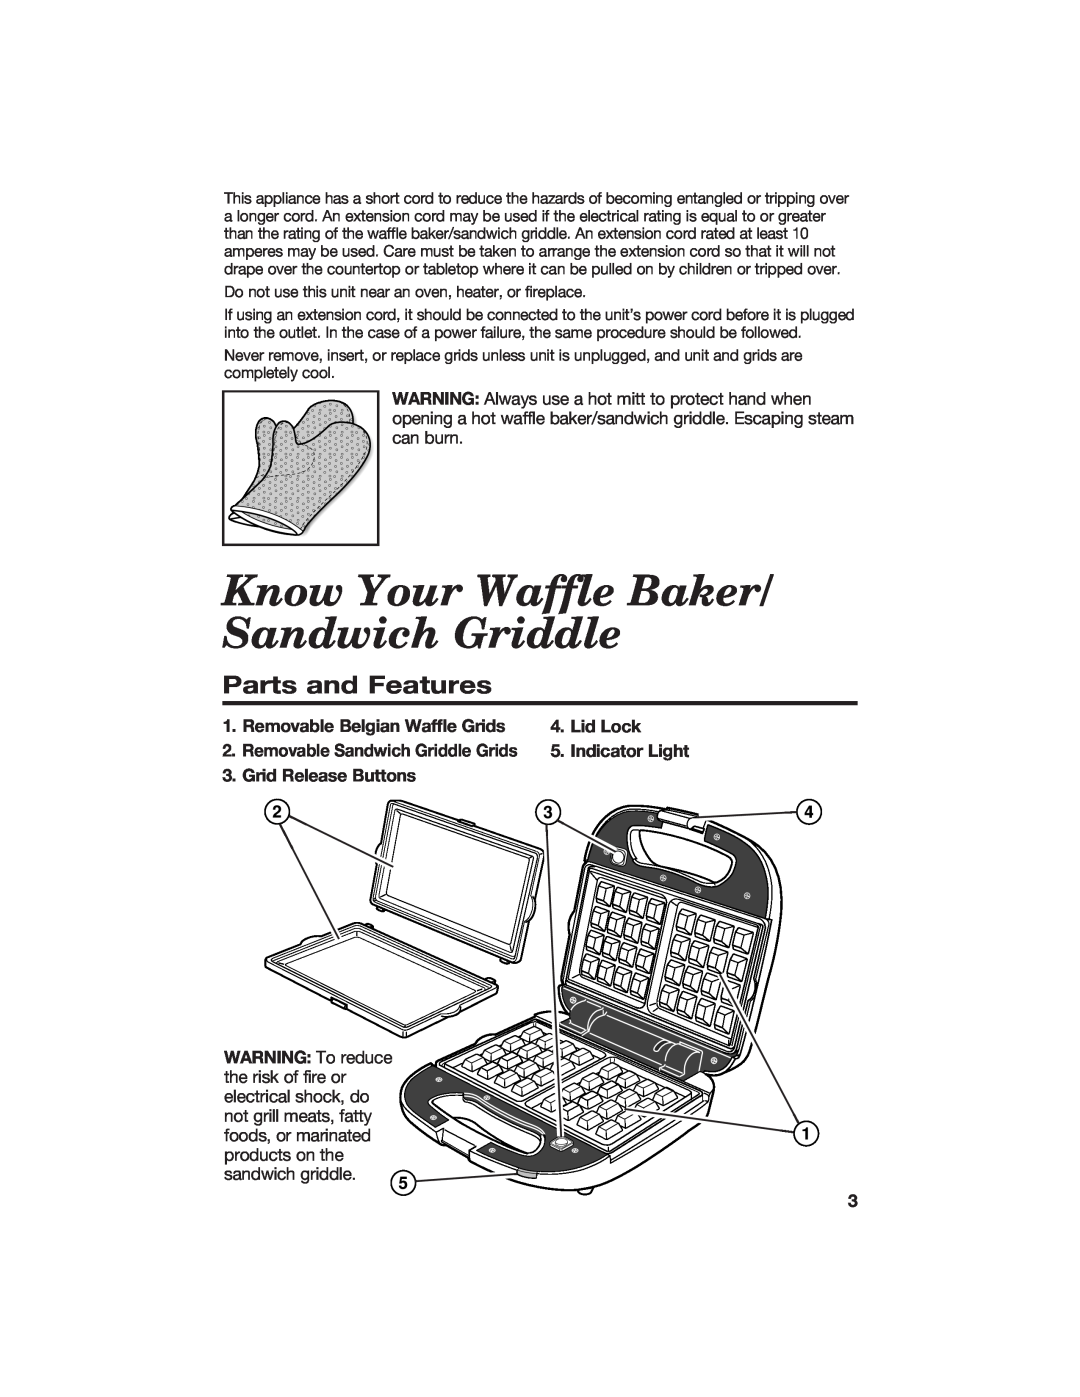 Hamilton Beach 840055700 Know Your Waffle Baker/ Sandwich Griddle, Parts and Features, Removable Belgian Waffle Grids 